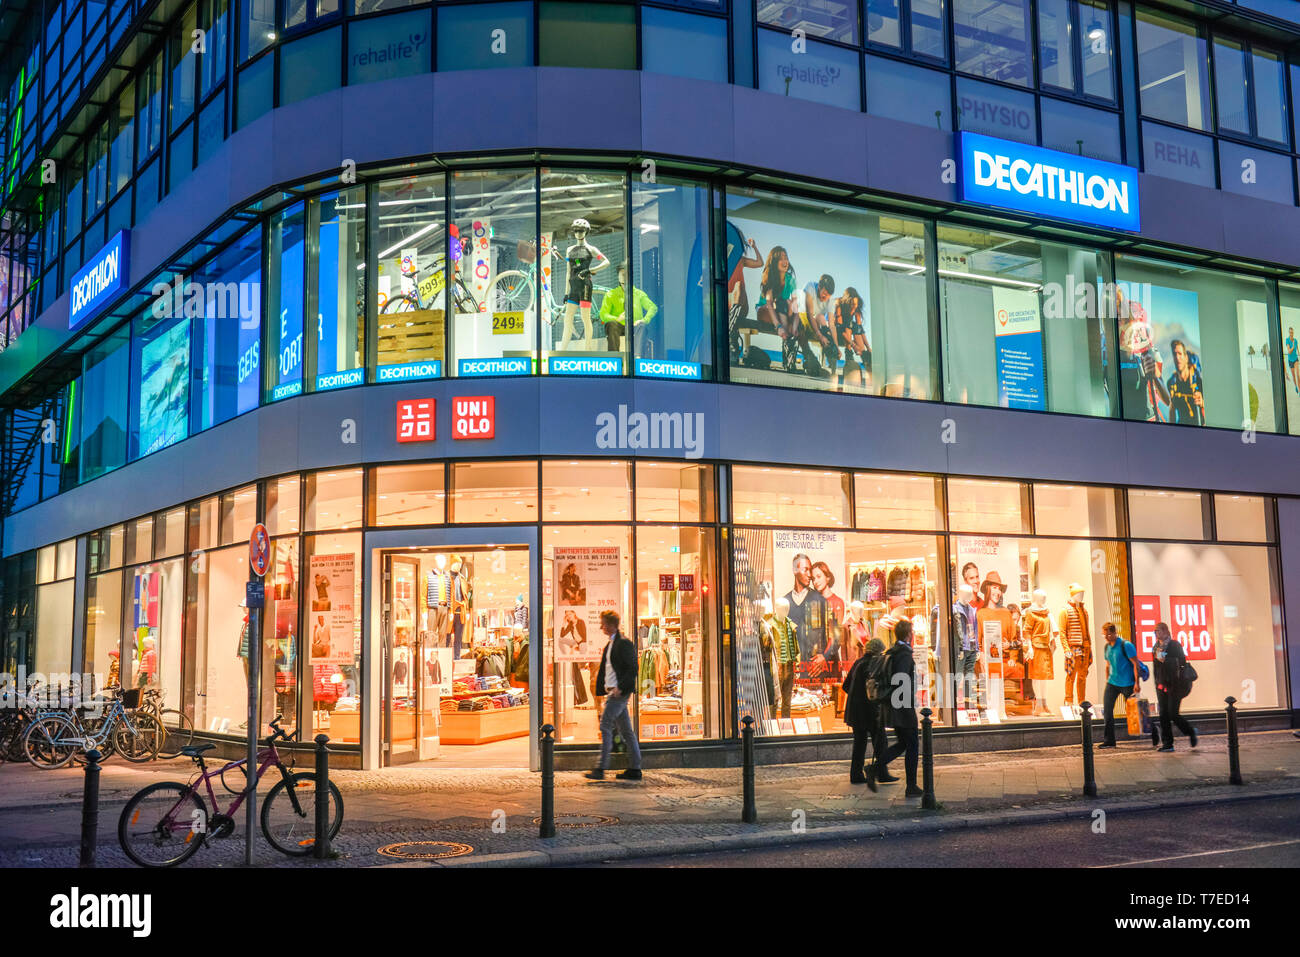 Decathlon Night High Resolution Stock Photography and Images - Alamy